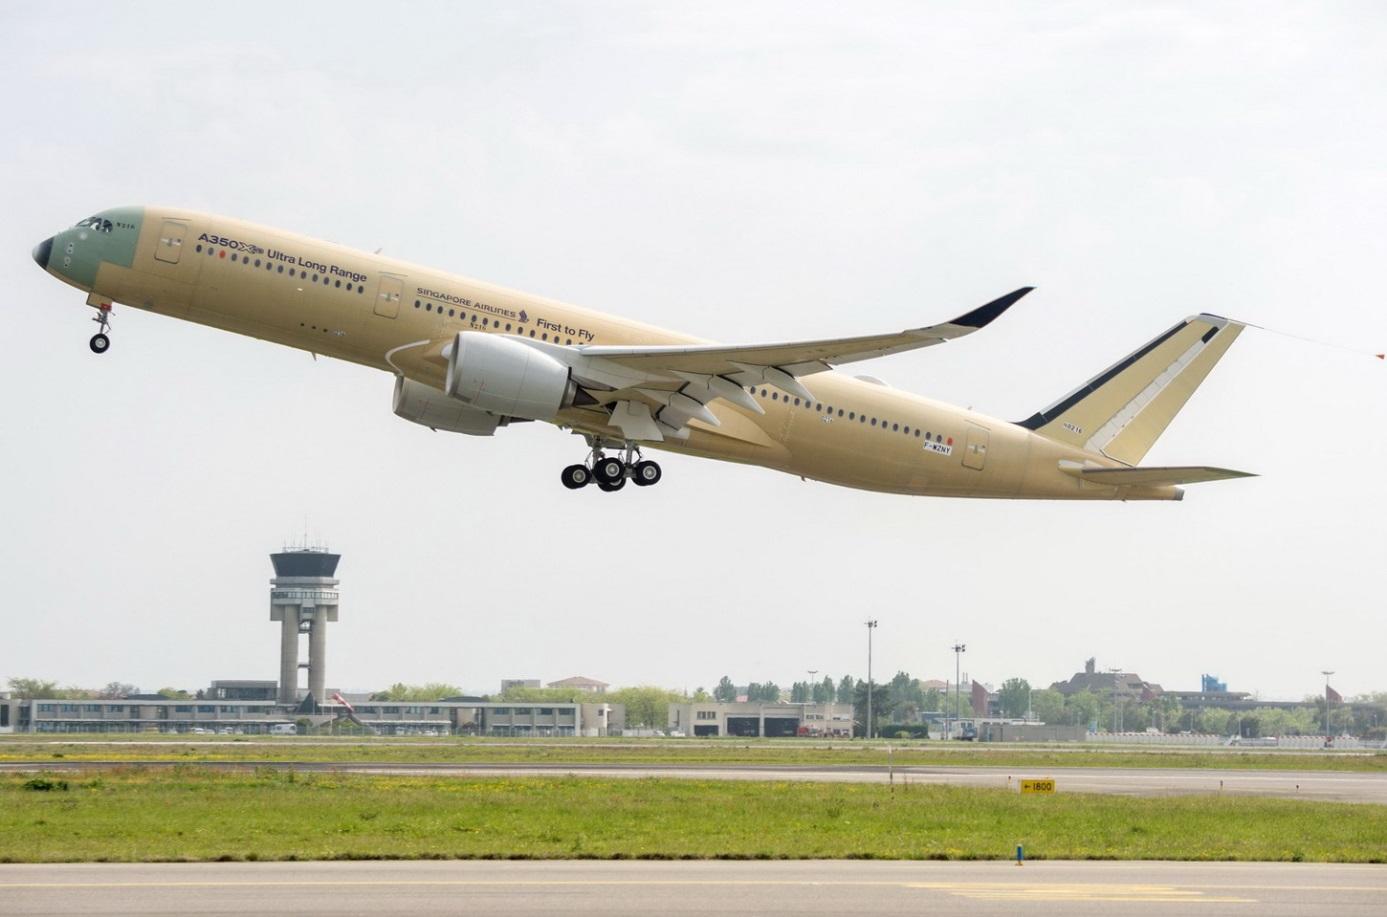 \\sfs.corp\Projects\PUBLIC AFFAIRS\COMMUNICATIONS\MEDIA\1. NEW MEDIA FILE\3. Press Releases\1. Ongoing PR - Confidential\2018.04.23 - A350 ULR FF\PHOTO\A350-900-ULR-Singapore-Airlines-take-off-.jpg